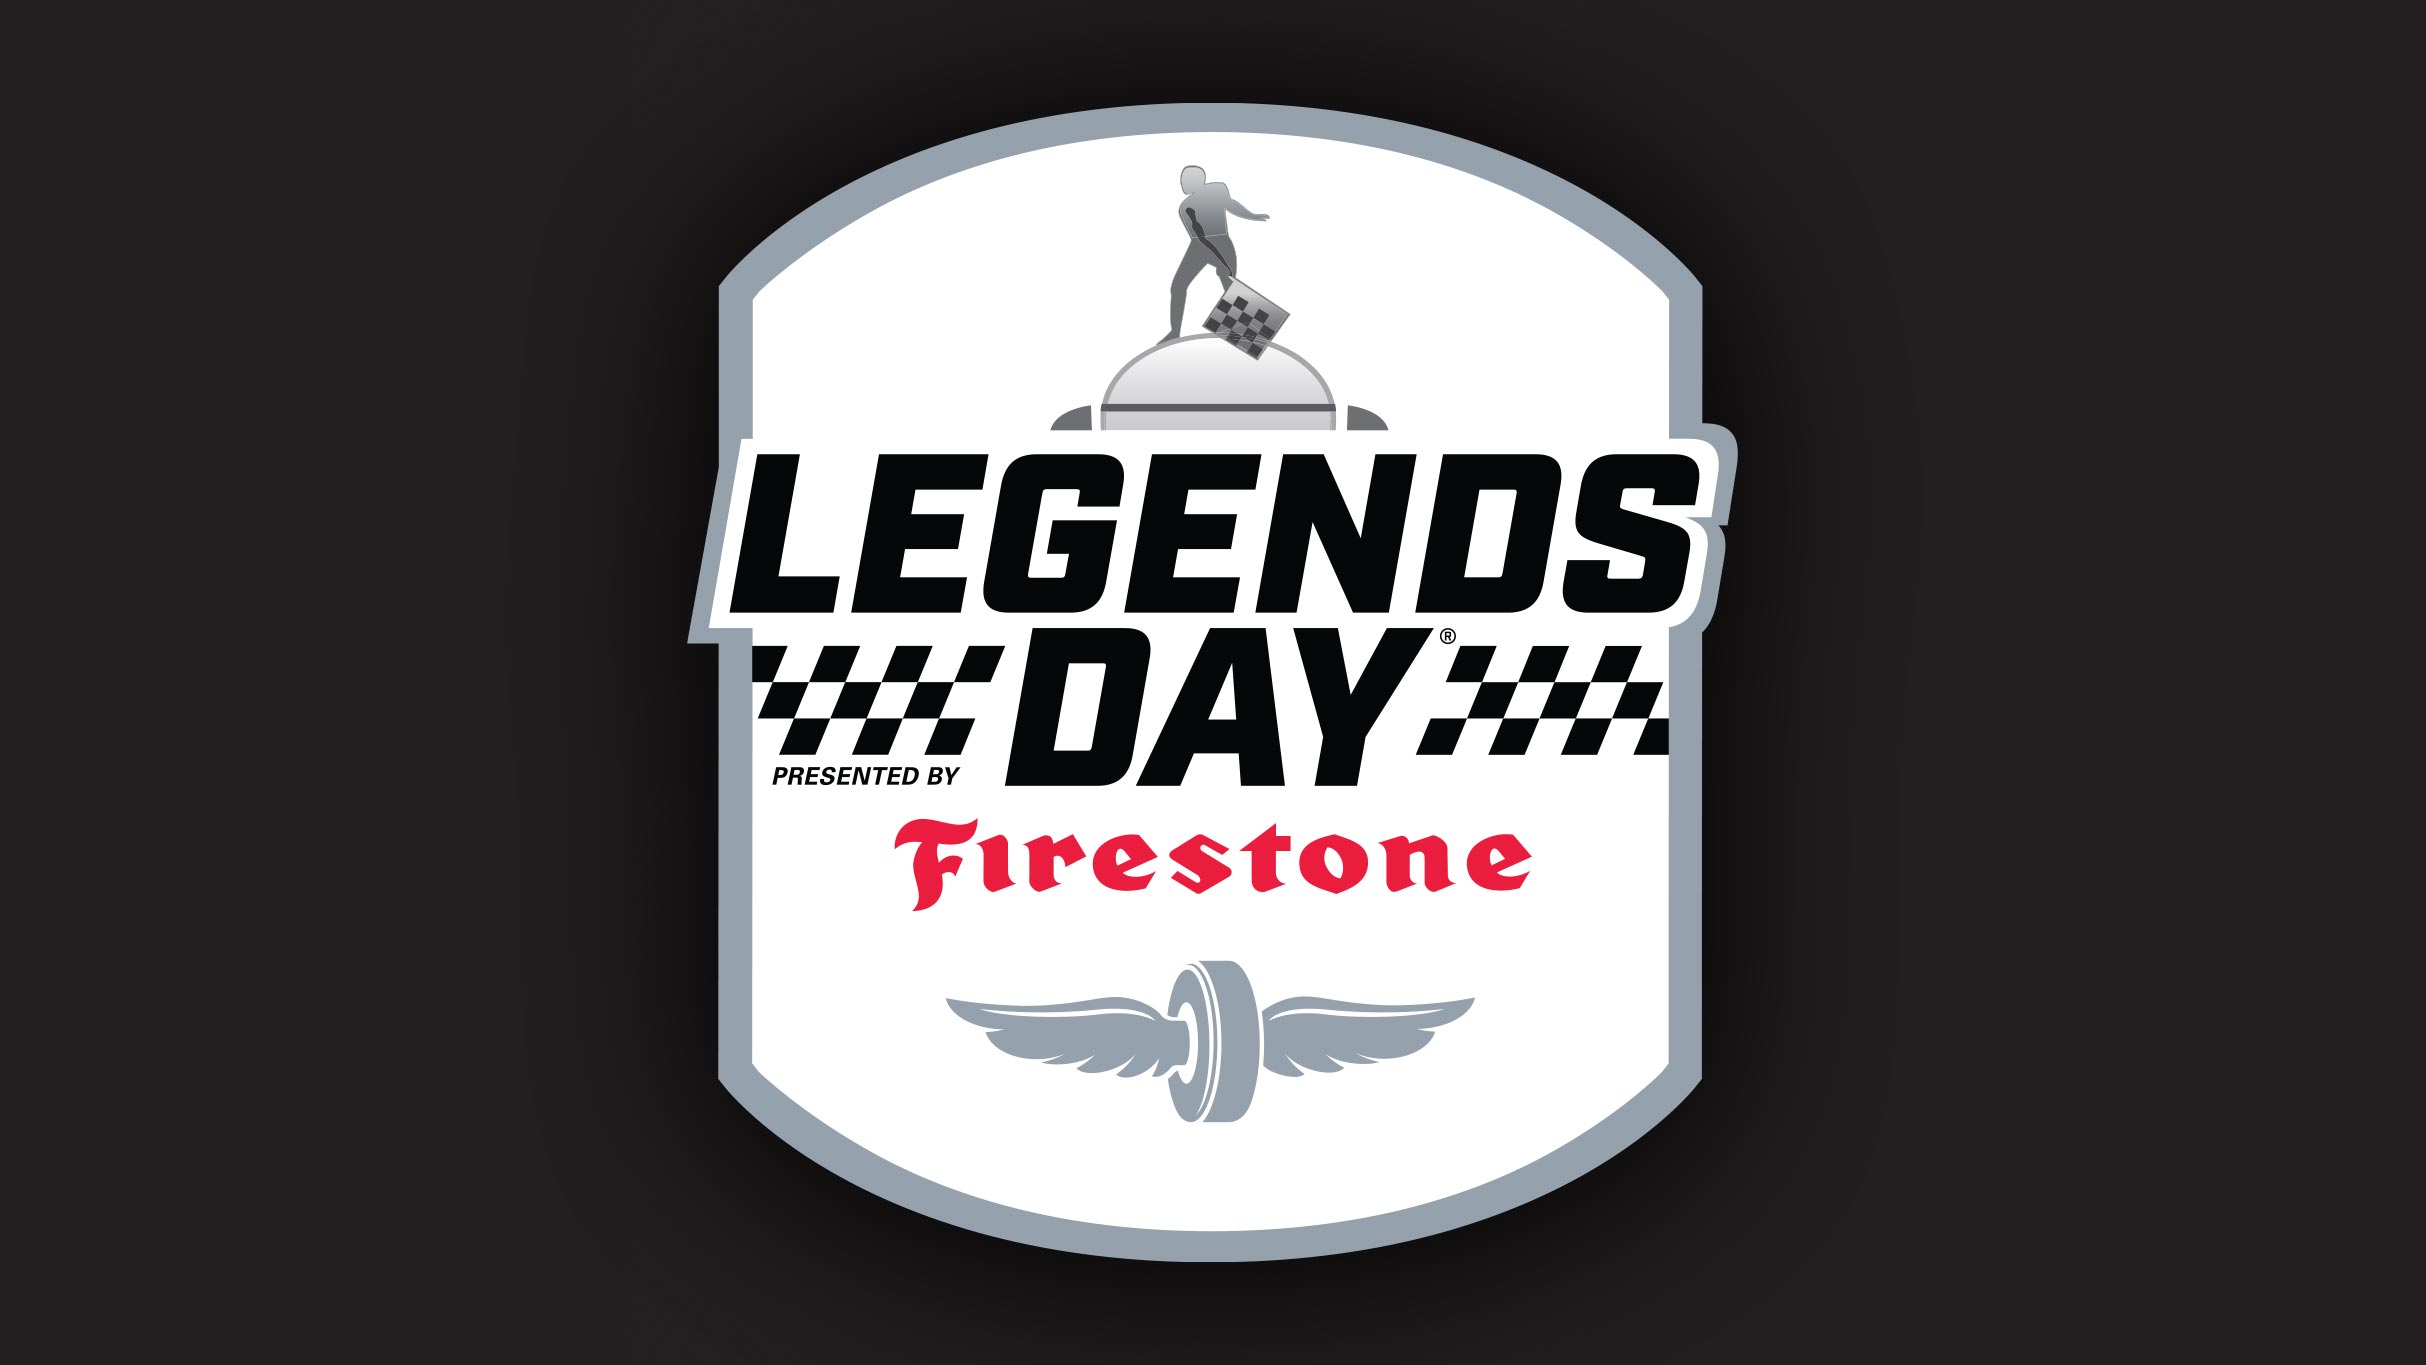 Firestone Legends Day Concert Featuring Brad Paisley in Indianapolis promo photo for Live Nation presale offer code